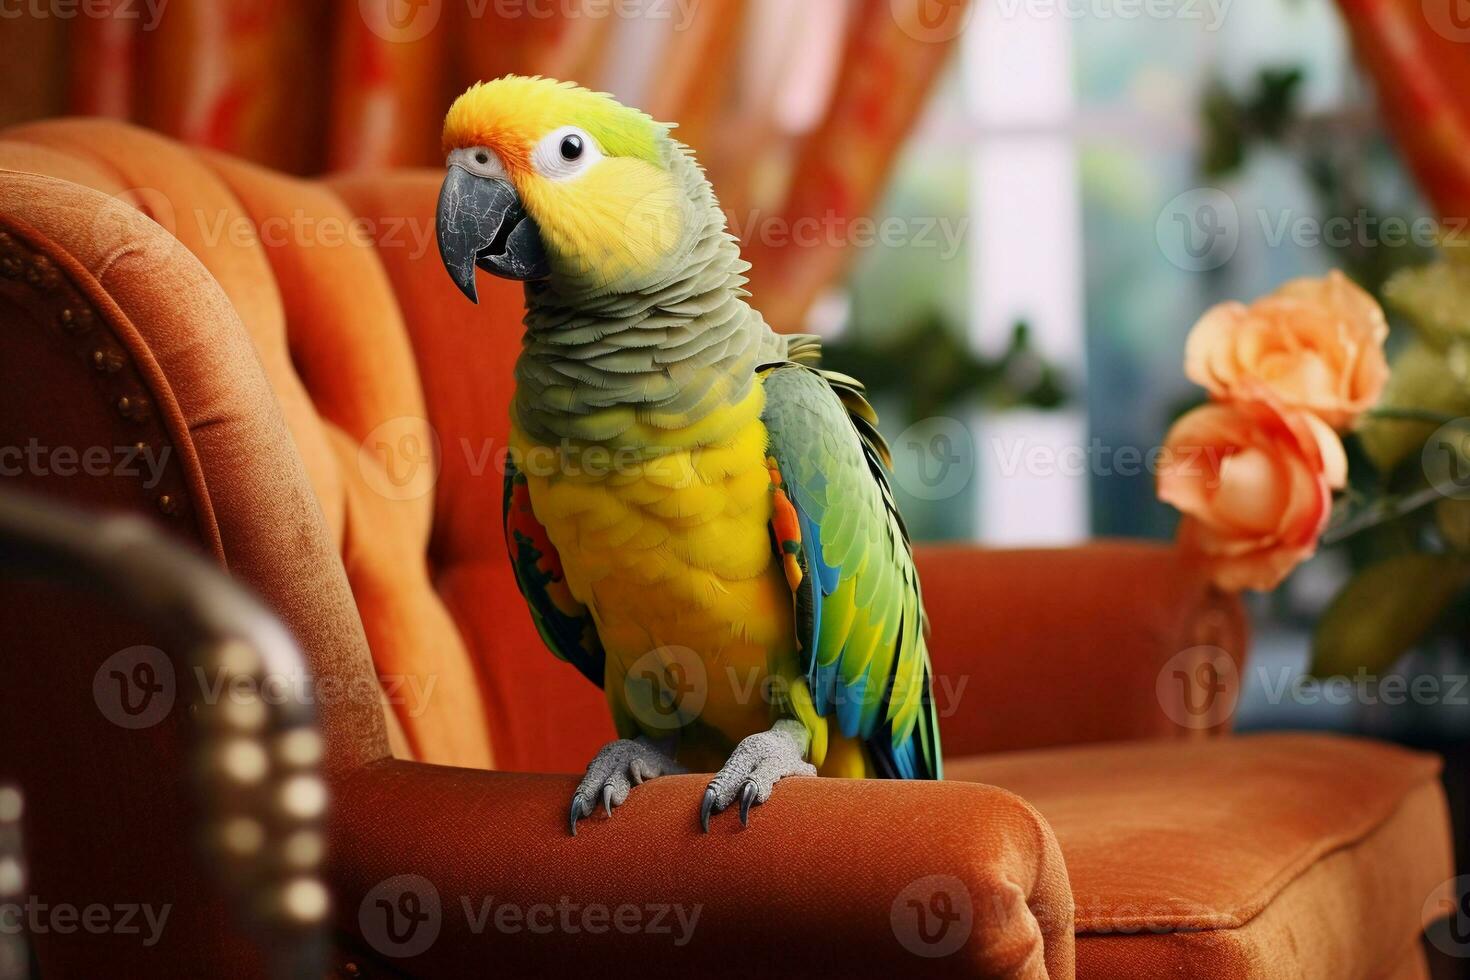 Cute Macaw Parrot Bird in Living Room. Macaw parrot bird with funny look photo